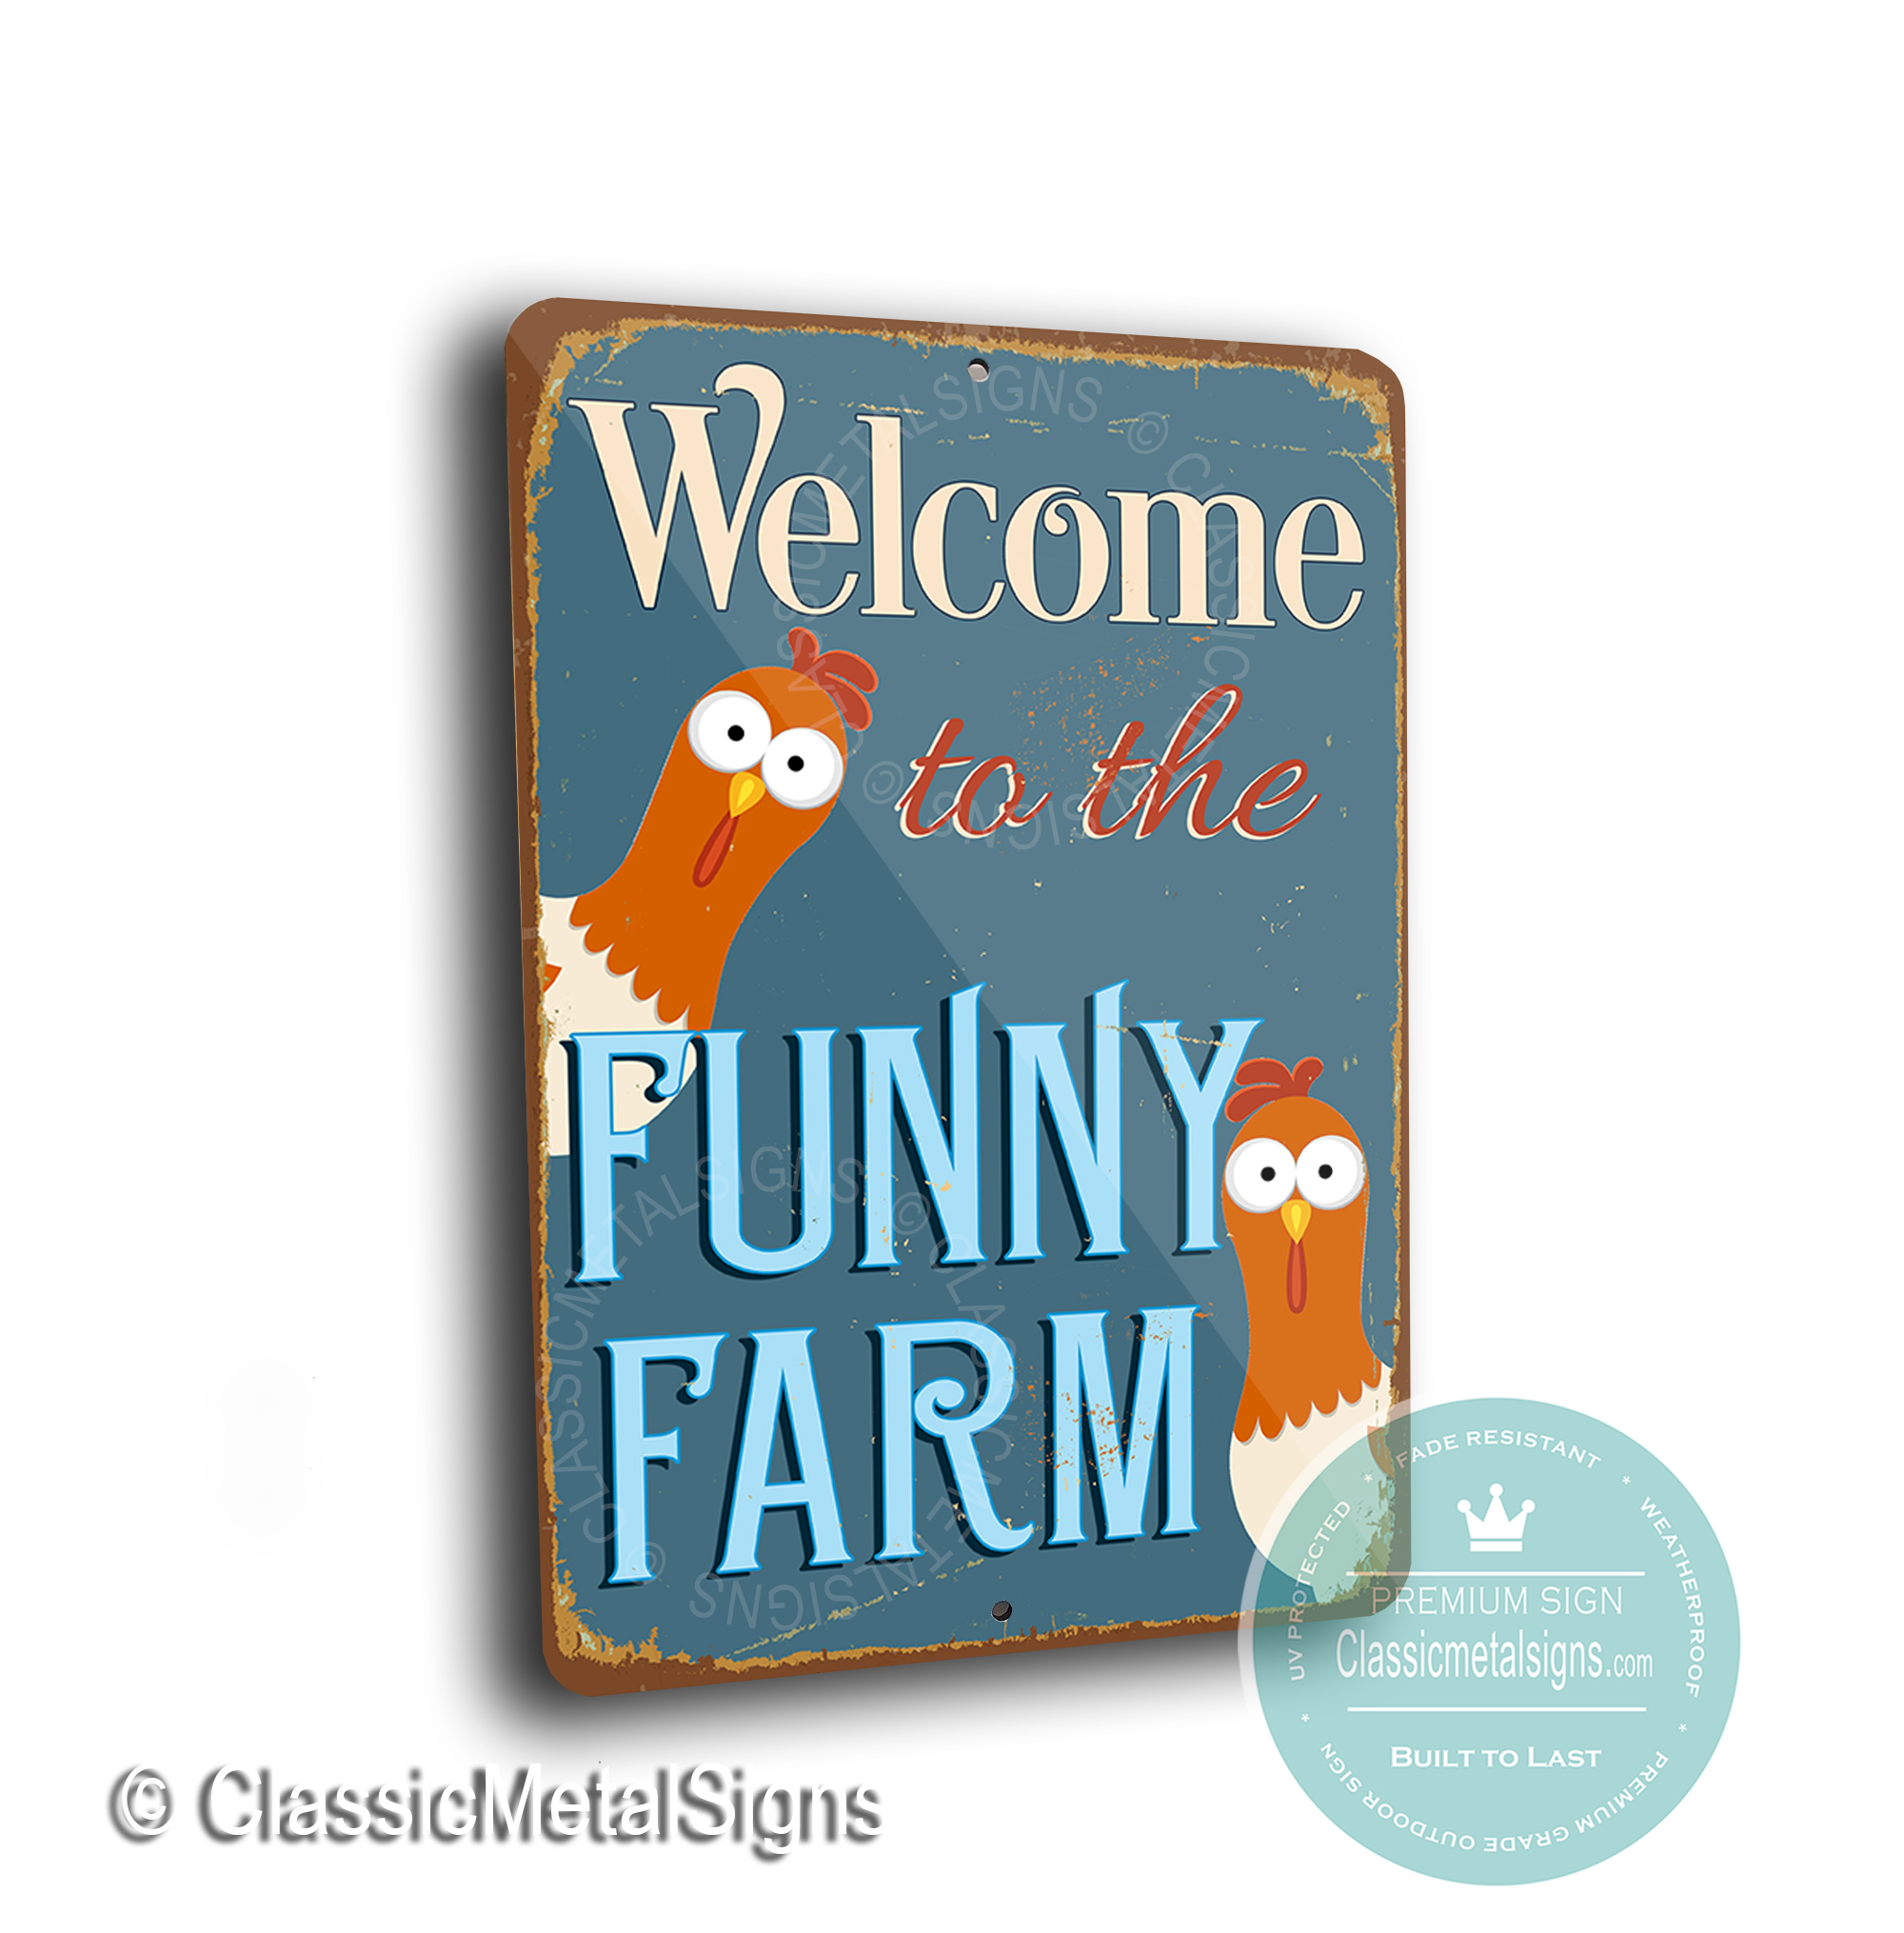 Welcome to the funny Farm Sign